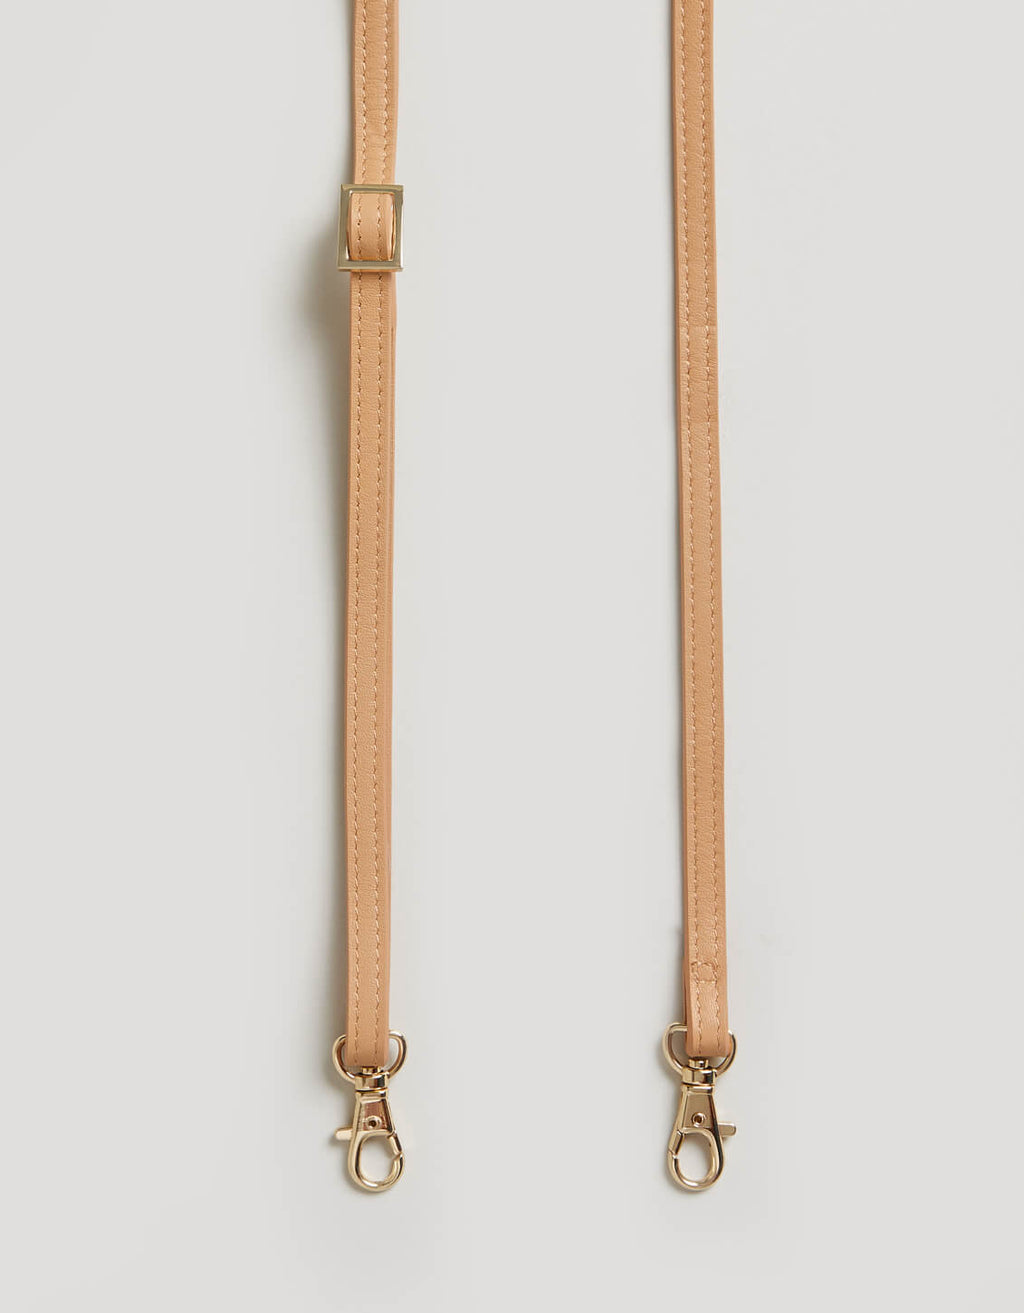 Shoulder Strap VVN Opinion? Would you recommend the adjustable